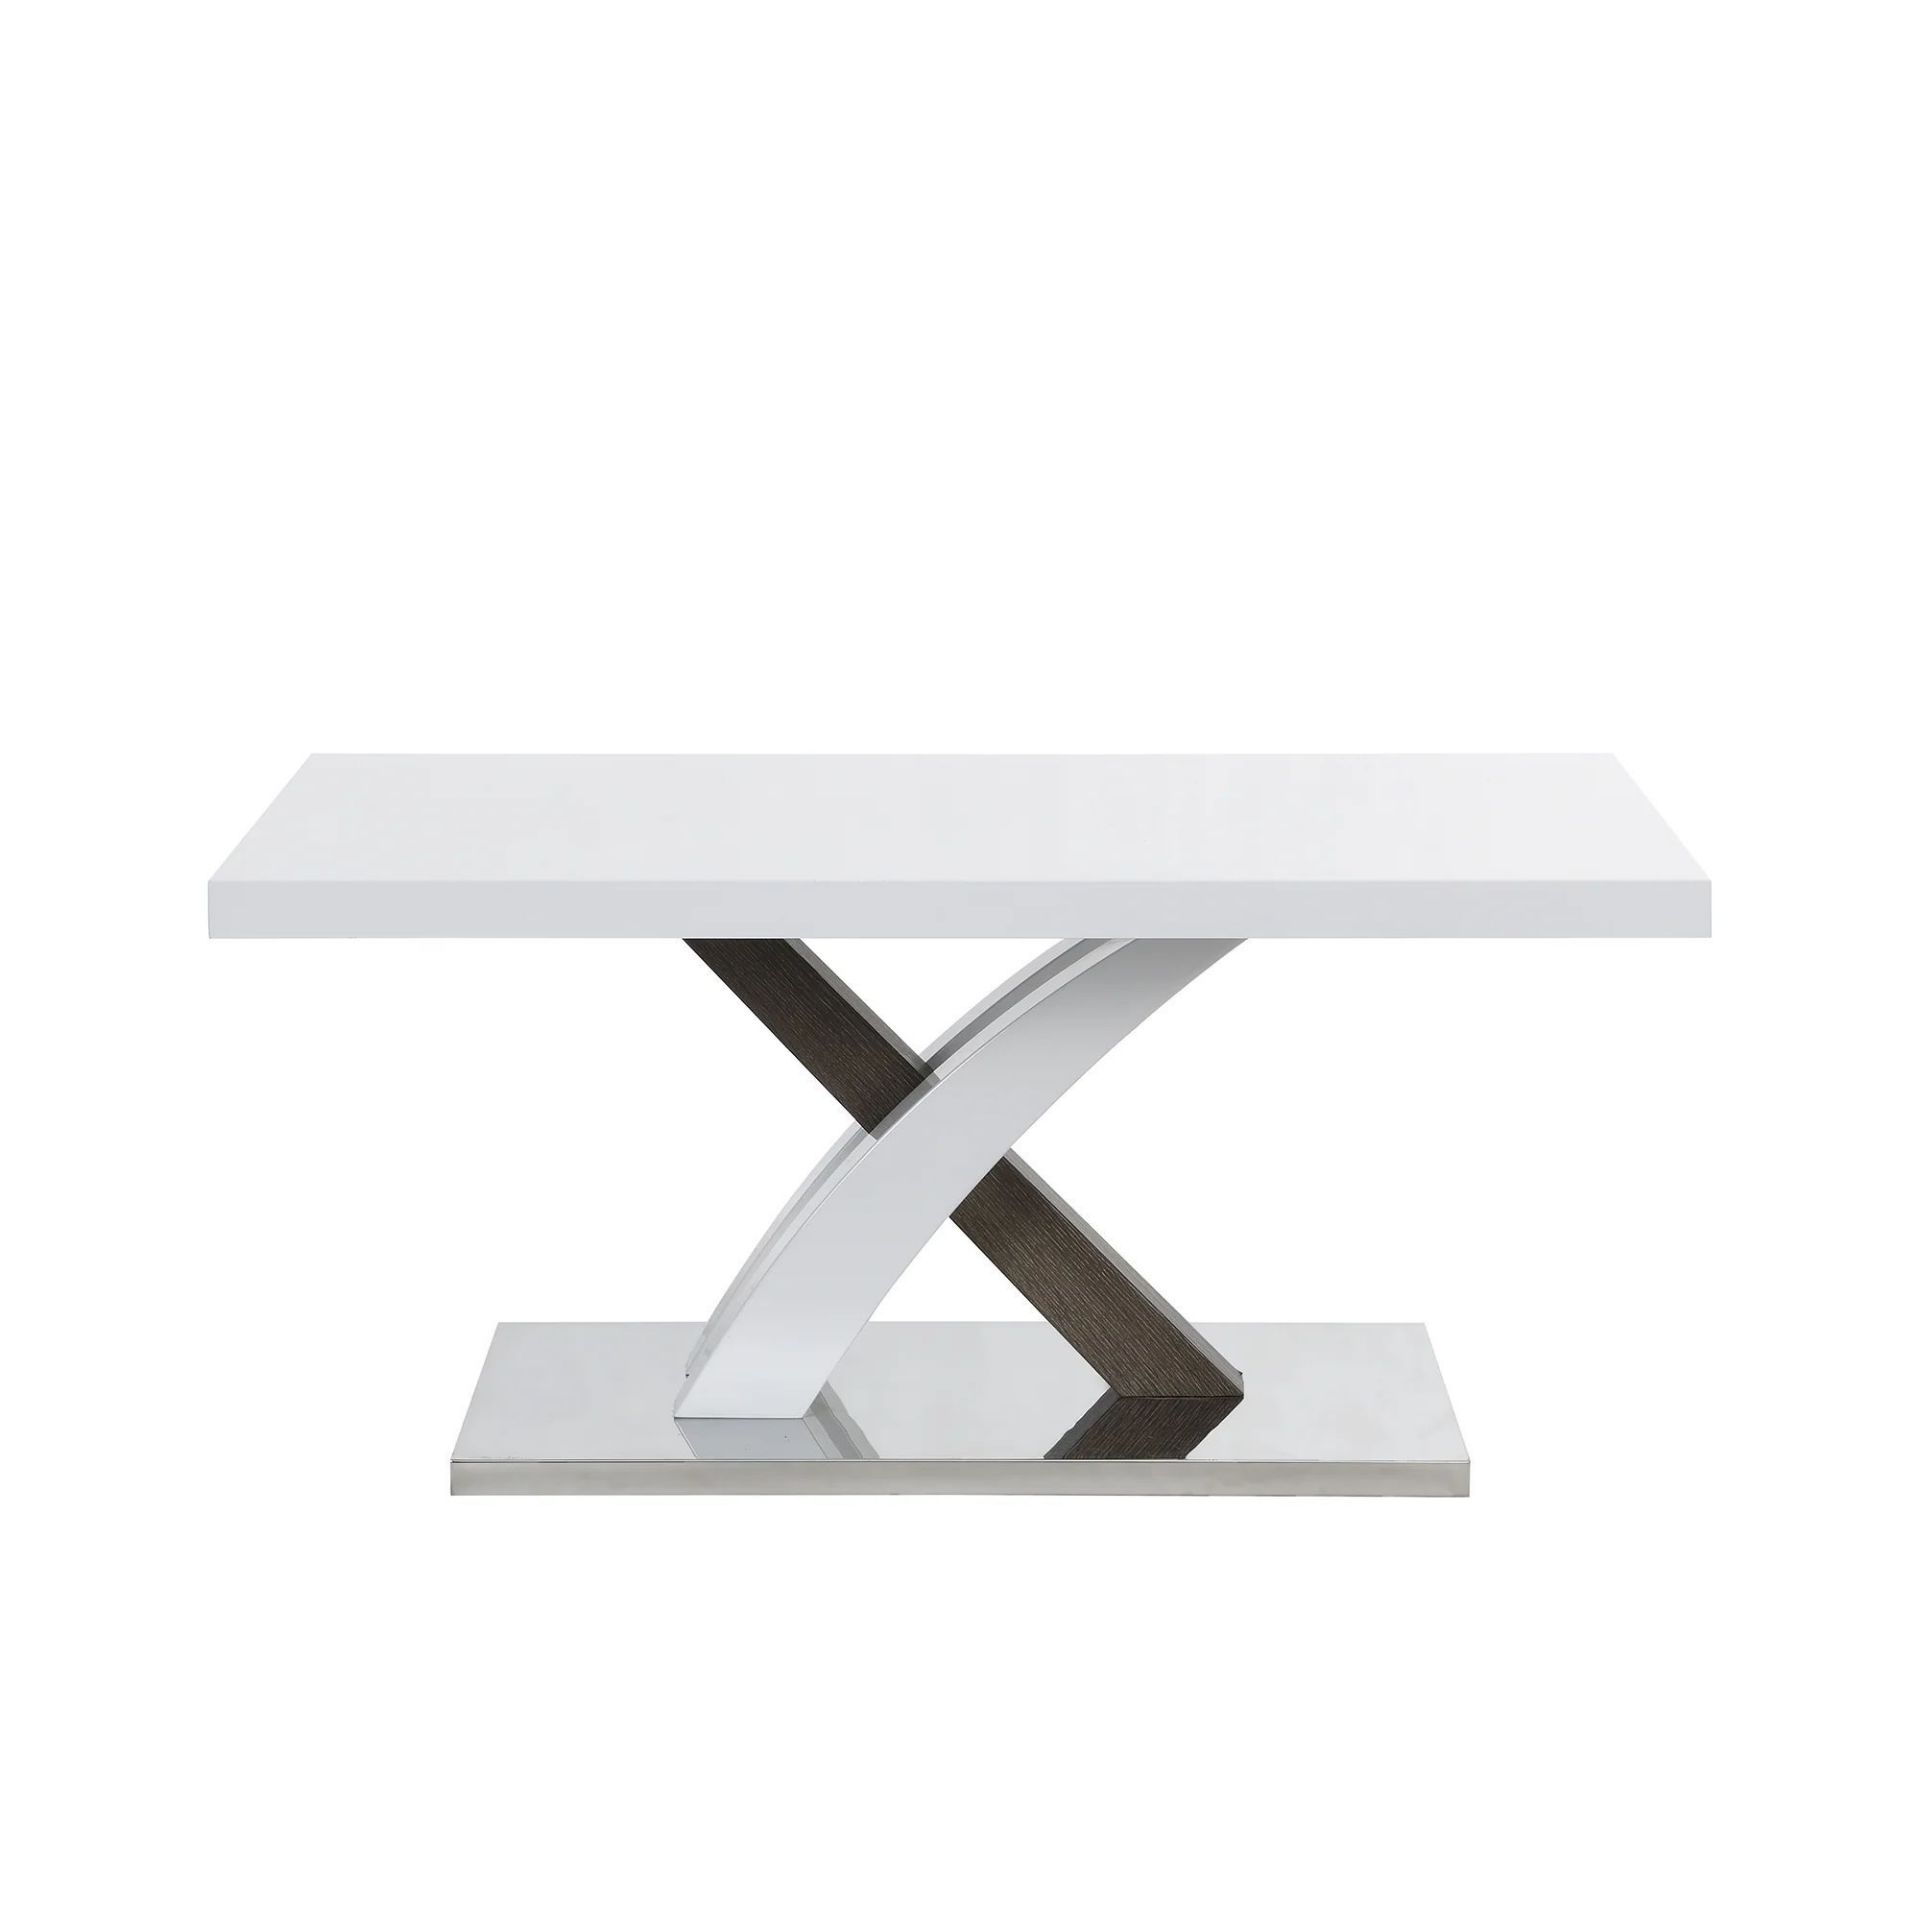 Basel High Gloss White Coffee Table with Stainless Steel Base. - ER23. RRP £199.99. The white glossy - Image 4 of 4